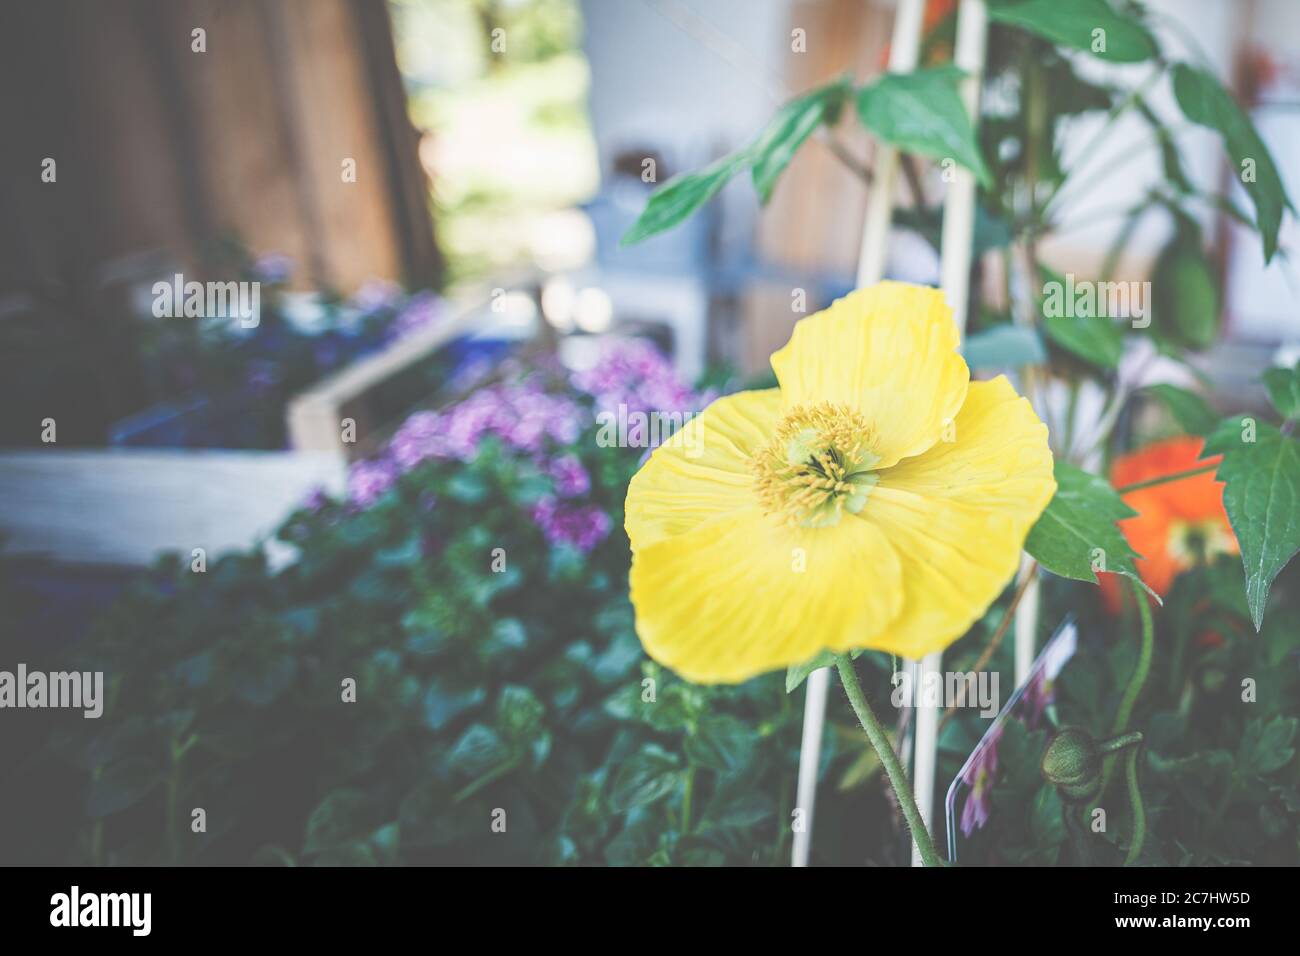 Clematis, Ranunculaceae, and Iceland Poppy, Papaver nudicaule, are beautiful summer bloomers for patios and balconies. Stock Photo